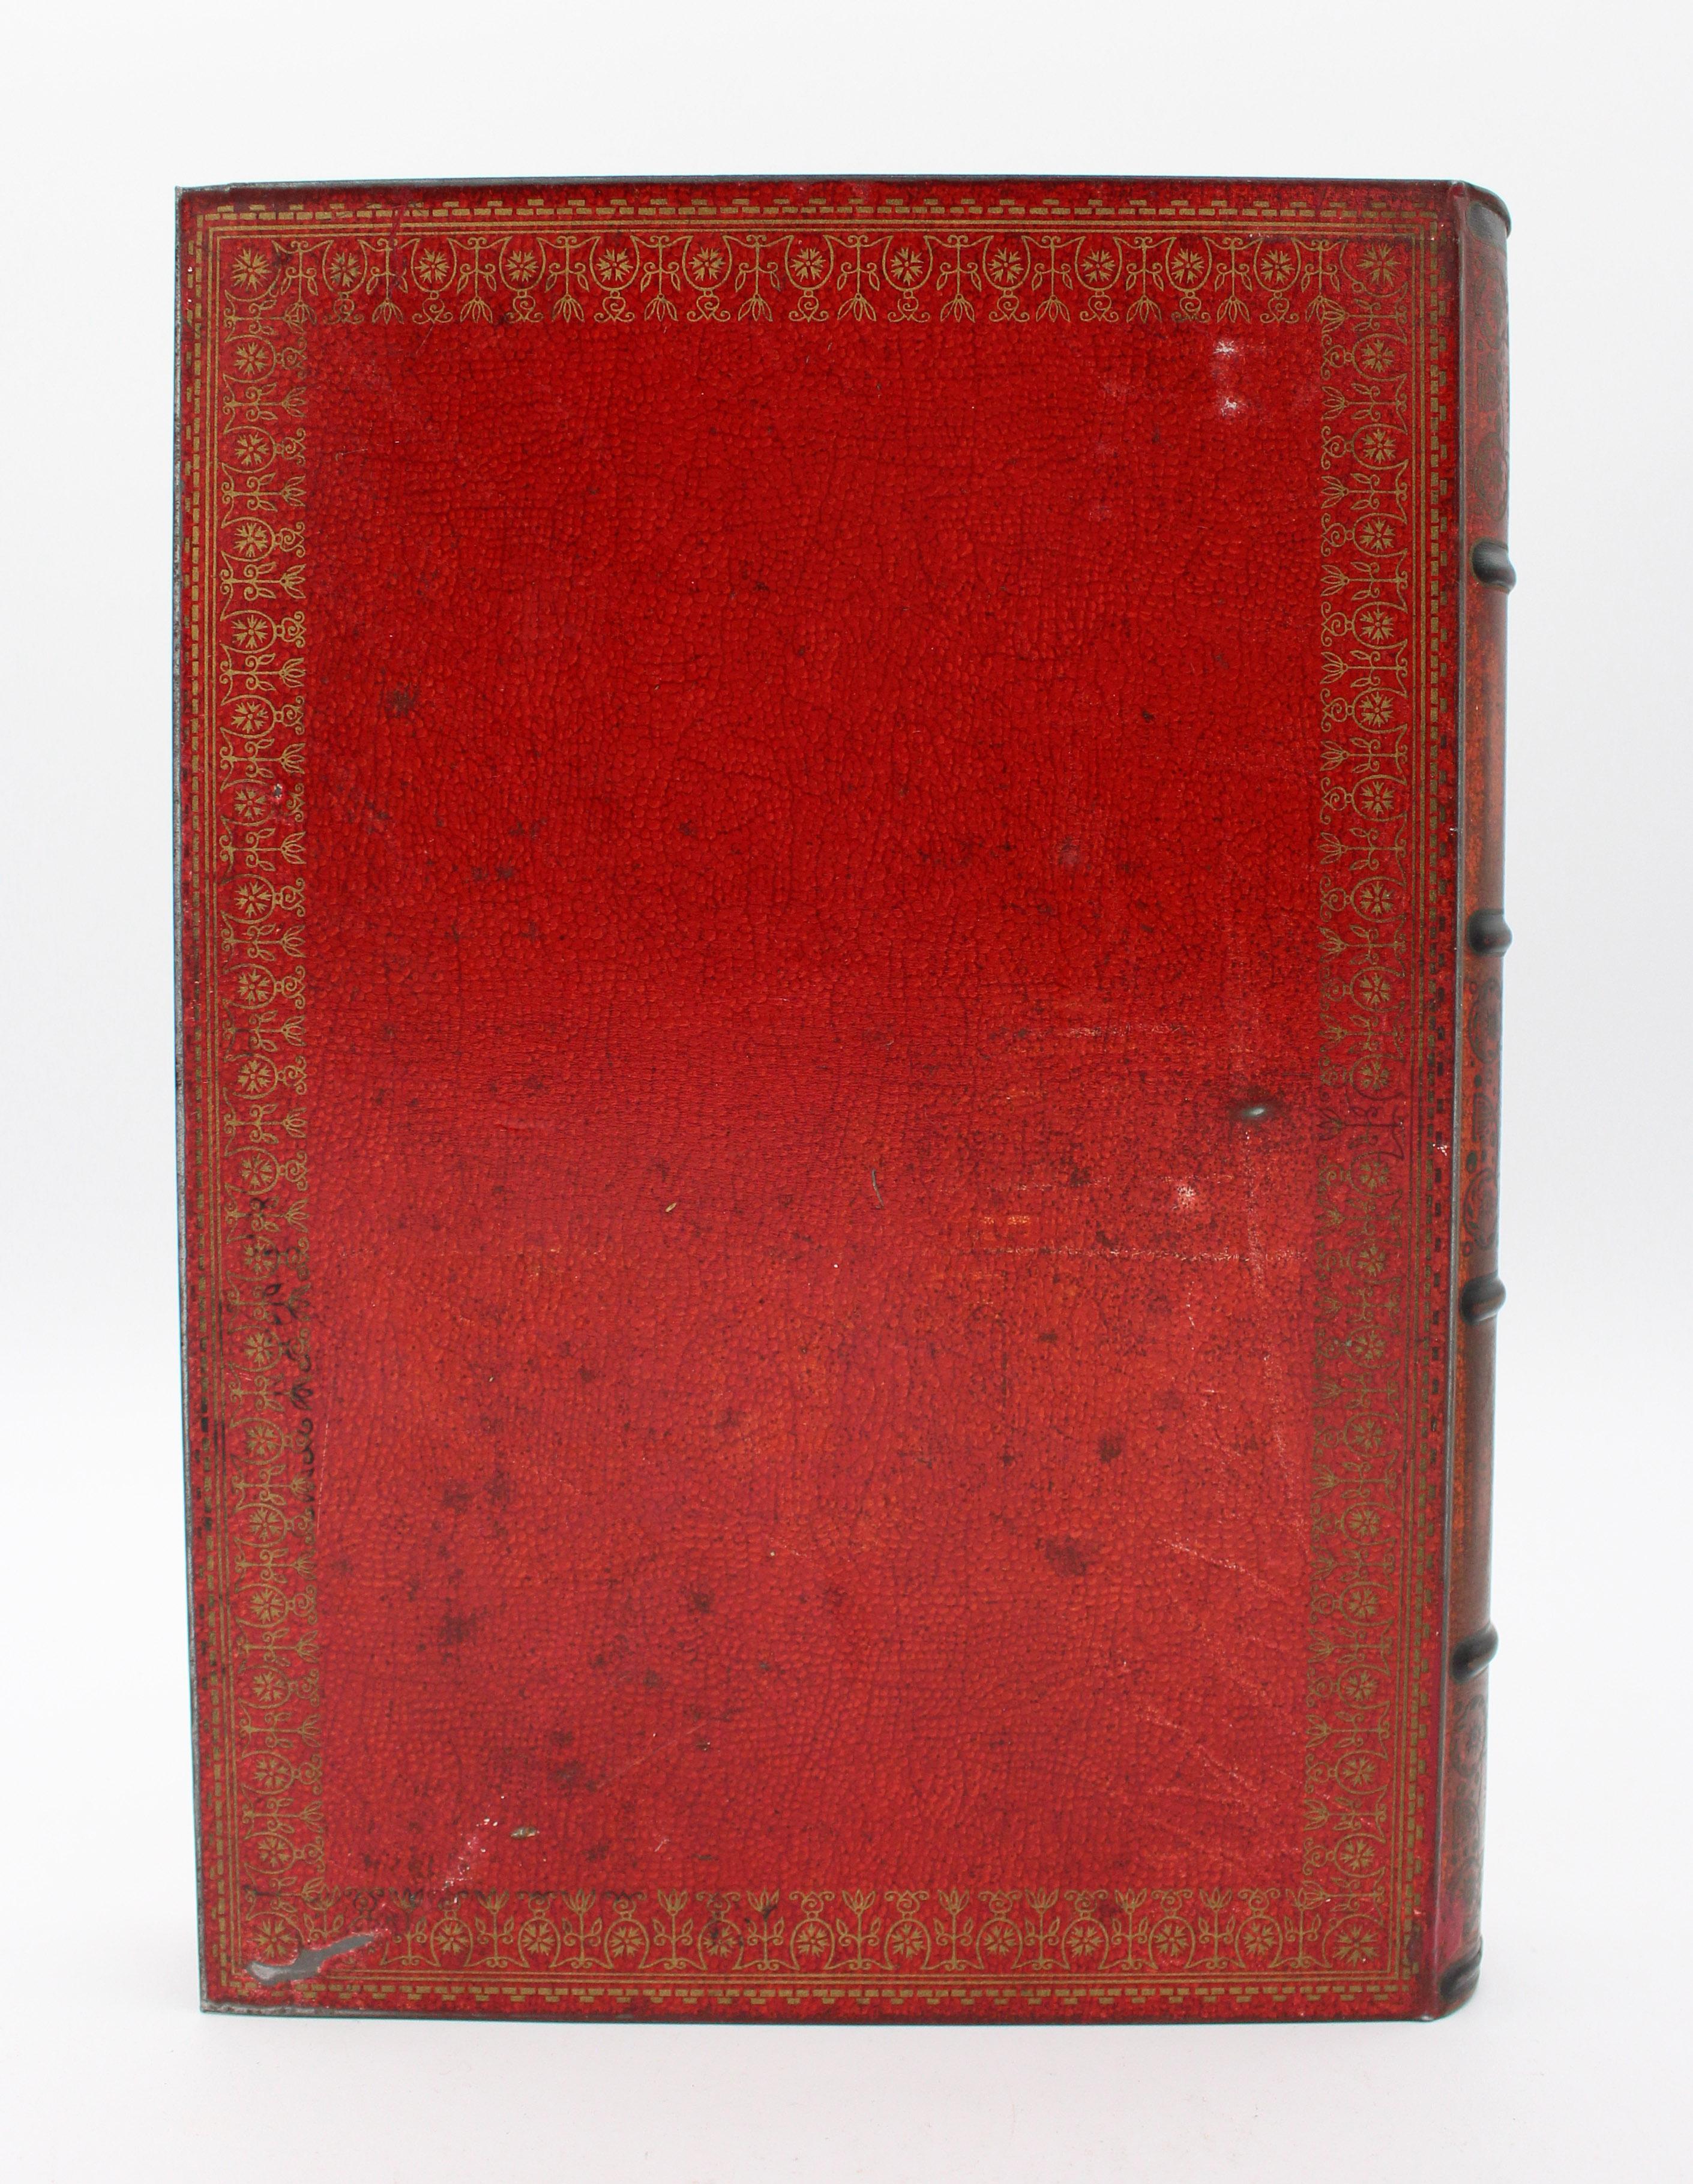 Aesthetic Movement c. 1930s-40s Scarlet Book Form Biscuit Tin by Huntley & Palmers For Sale